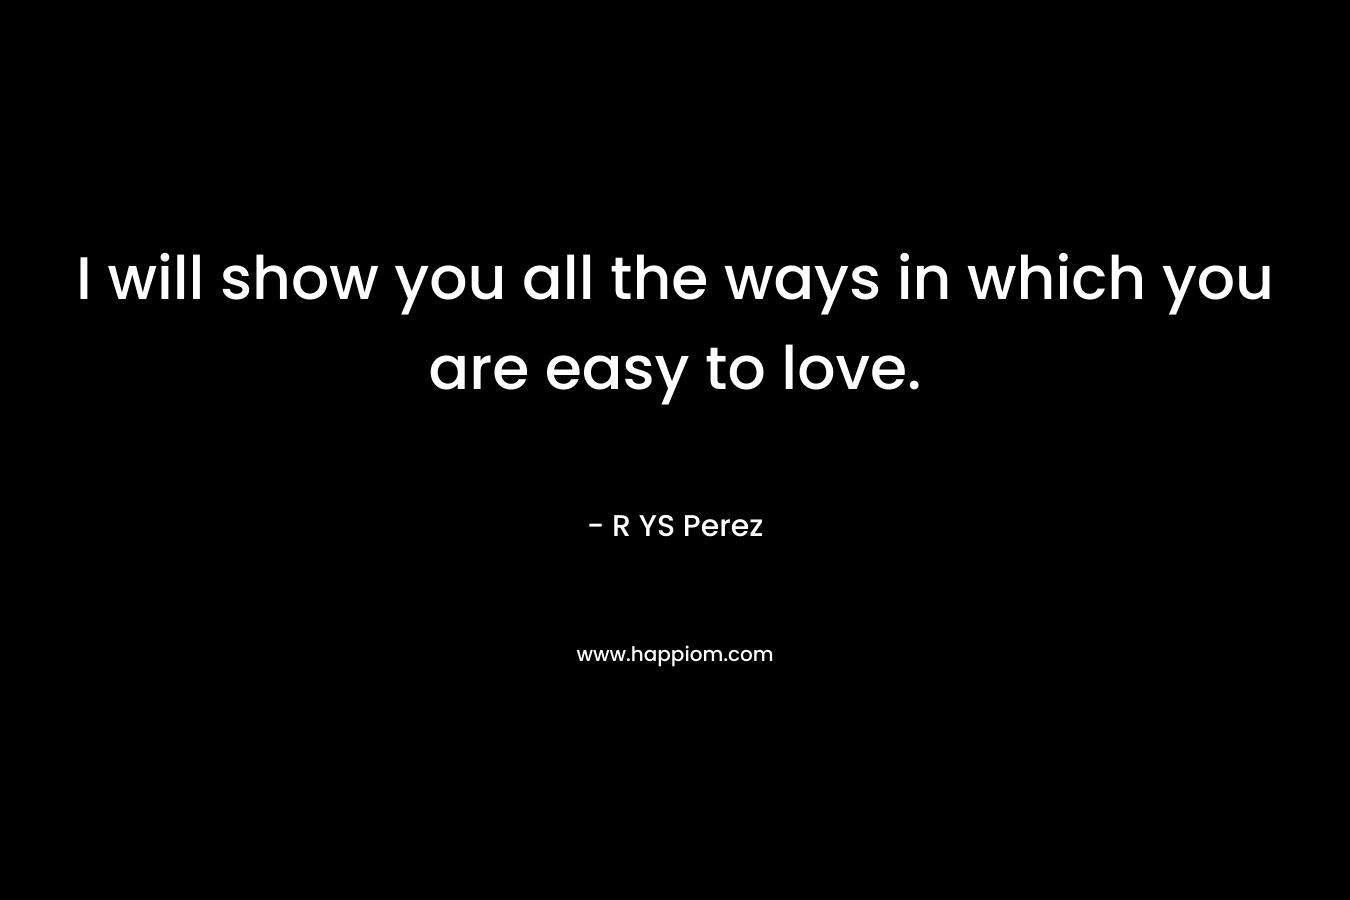 I will show you all the ways in which you are easy to love.